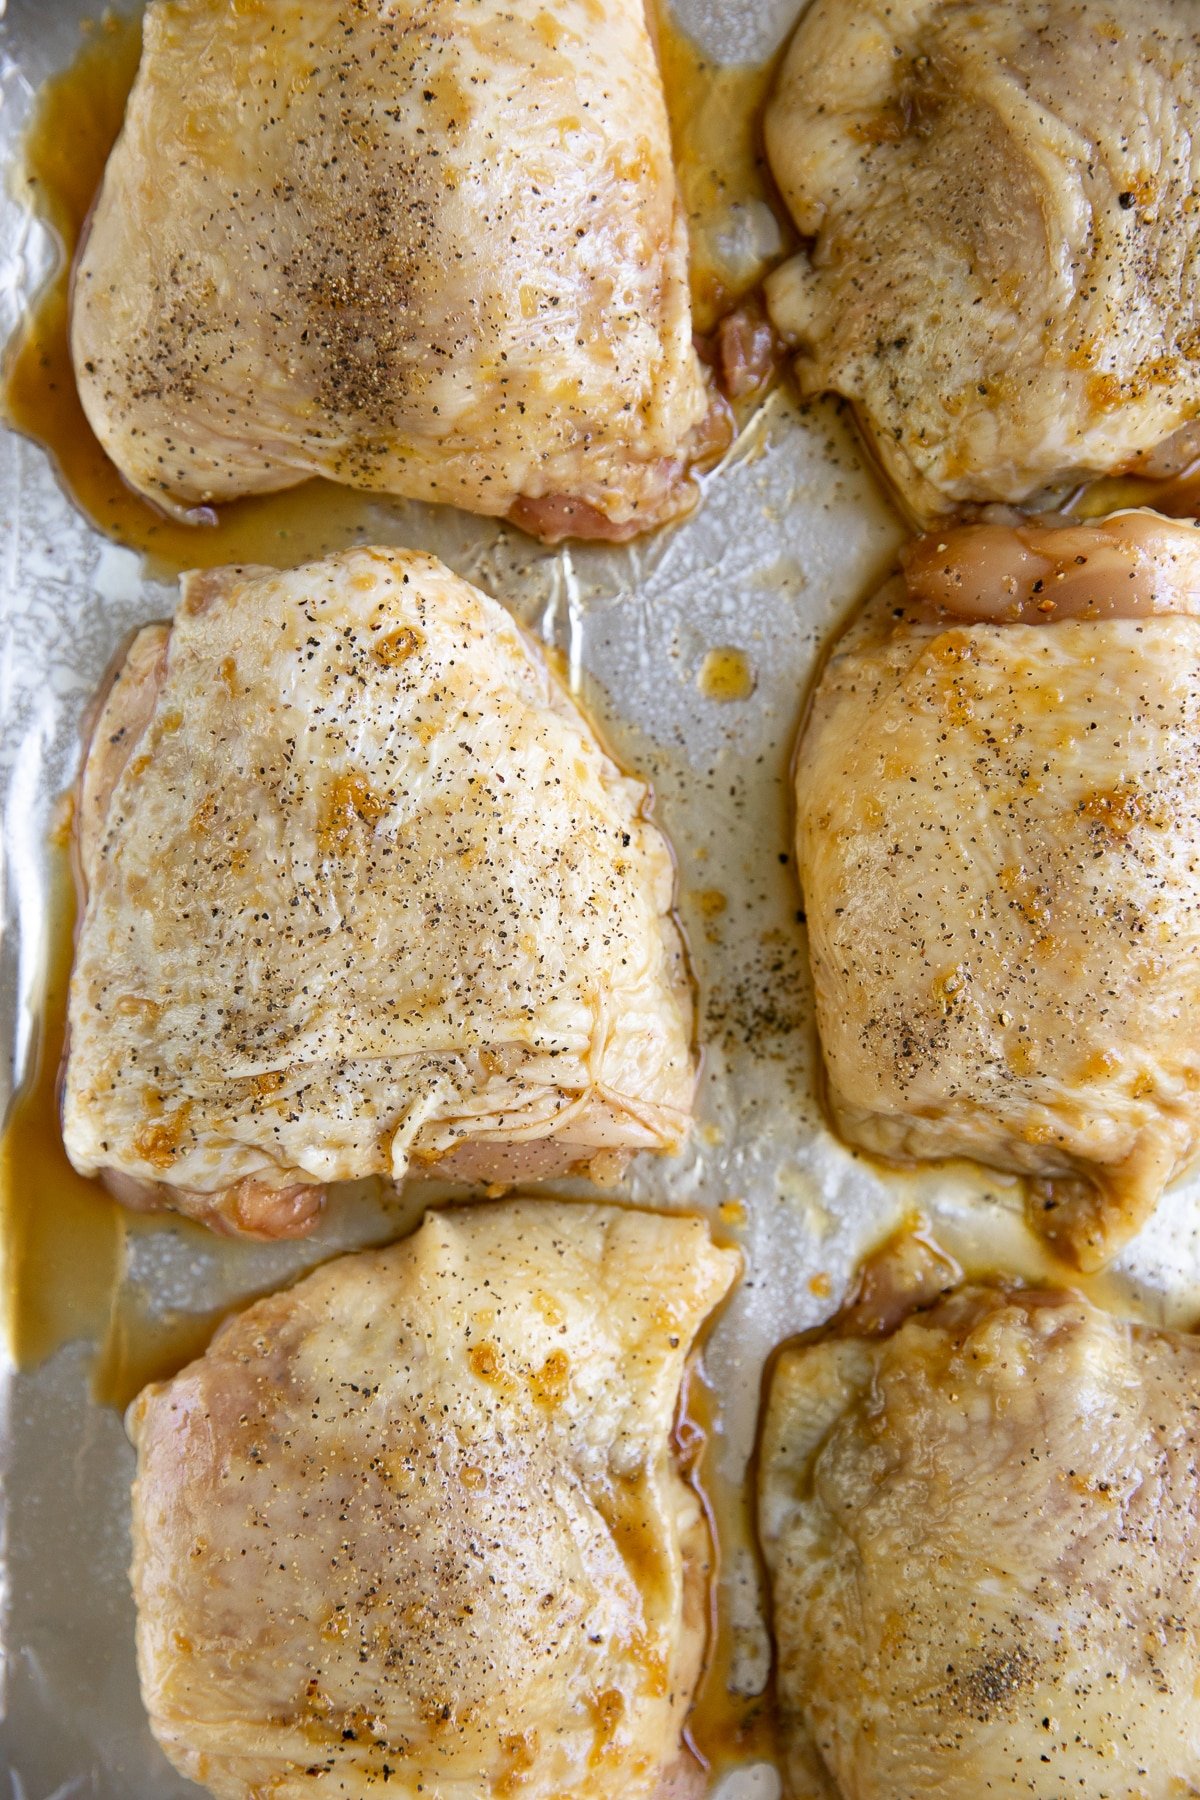 Six large skinned chicken thighs marinated in a honey soy sauce set on a large rimmed baking sheet lined with aluminum foil.